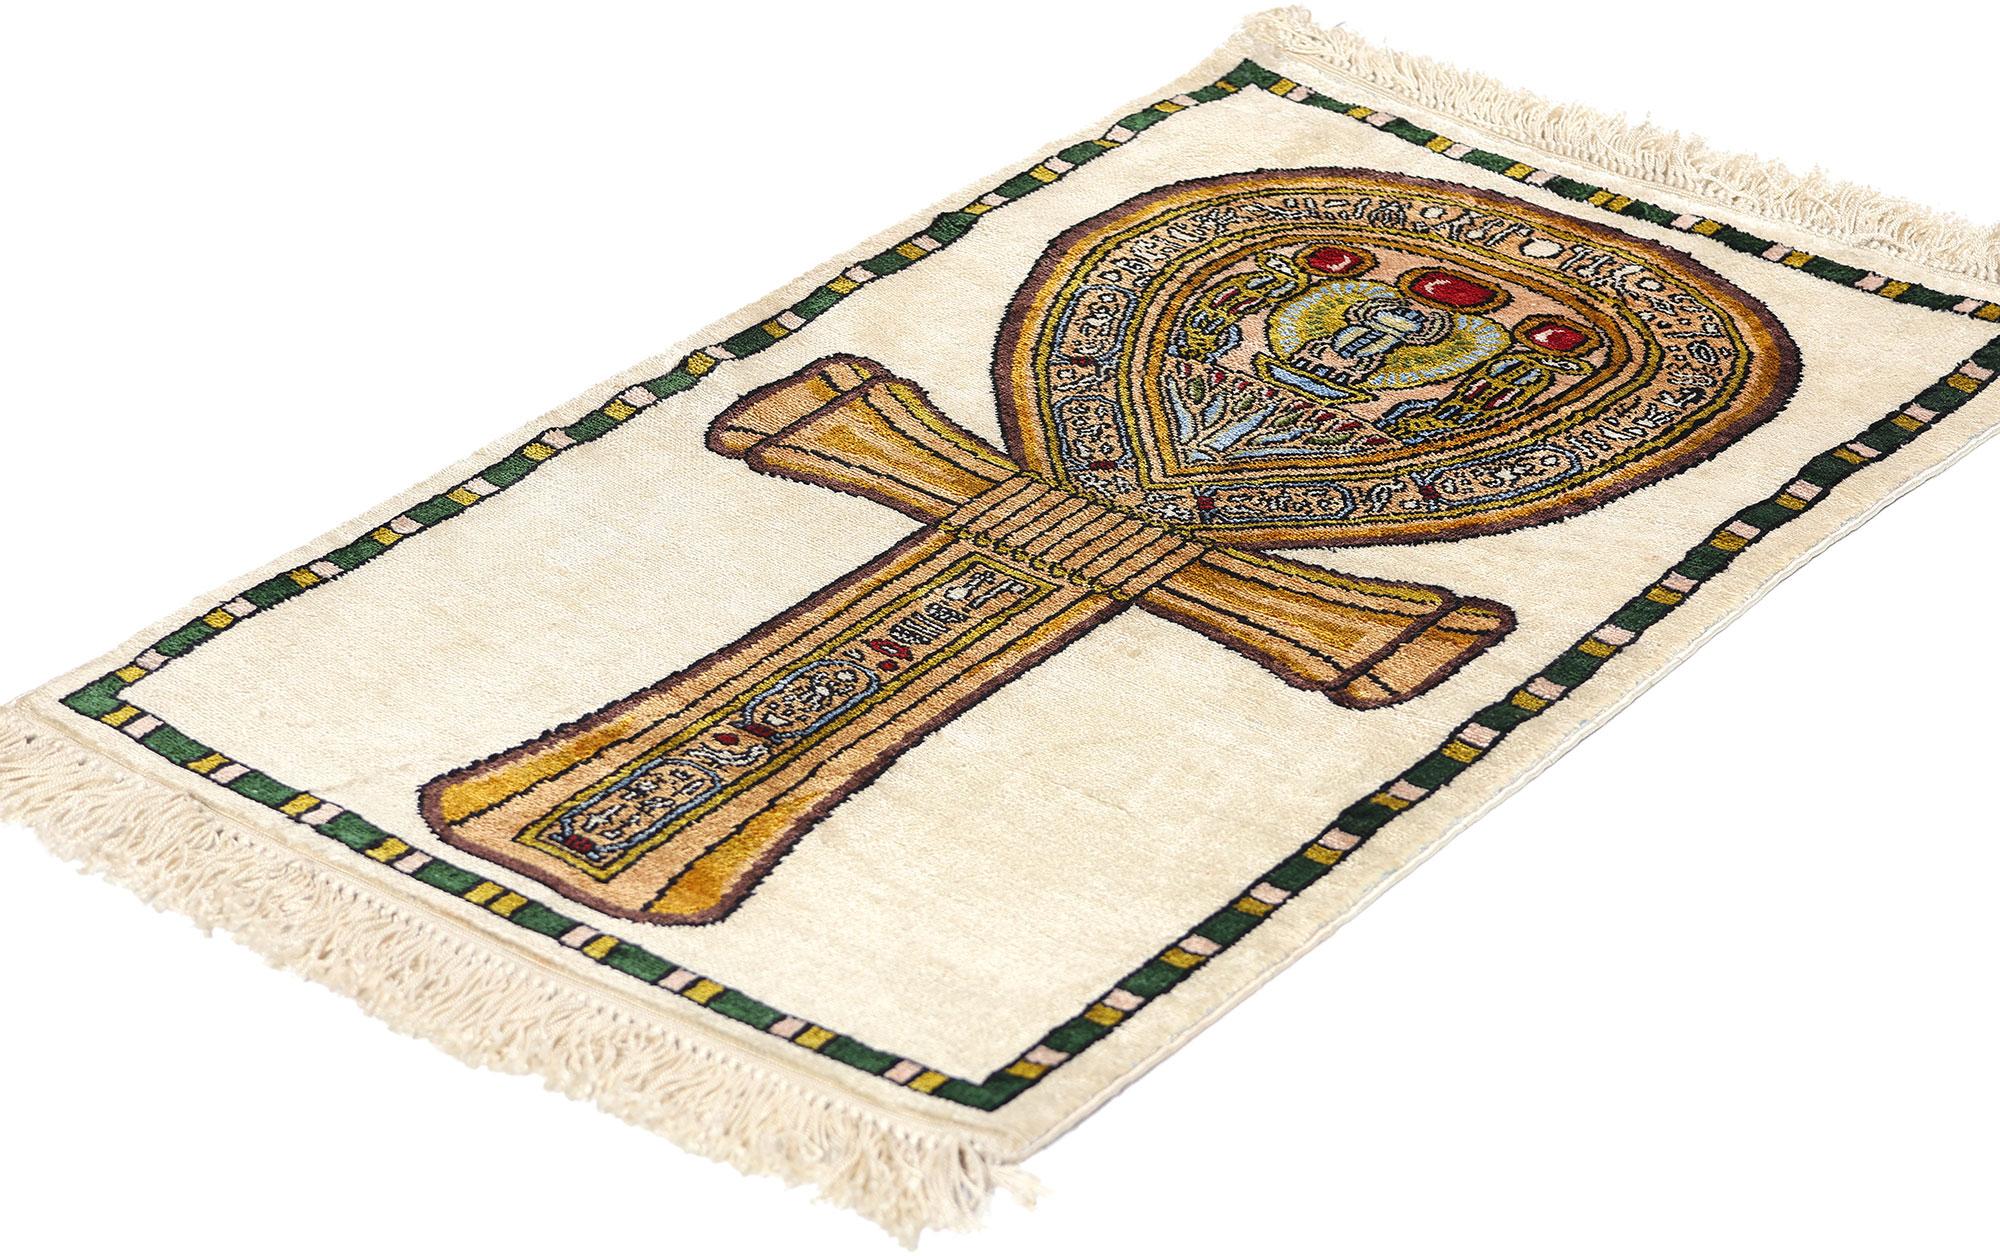 78745 Vintage Turkish Silk Rug with Egyptian Ankh Motif, 01'04 x 02'01. This hand knotted vintage Turkish silk rug features a large-scale Egyptian Ankh motif, making it a unique and beautiful piece. The combination of Turkish craftsmanship with an